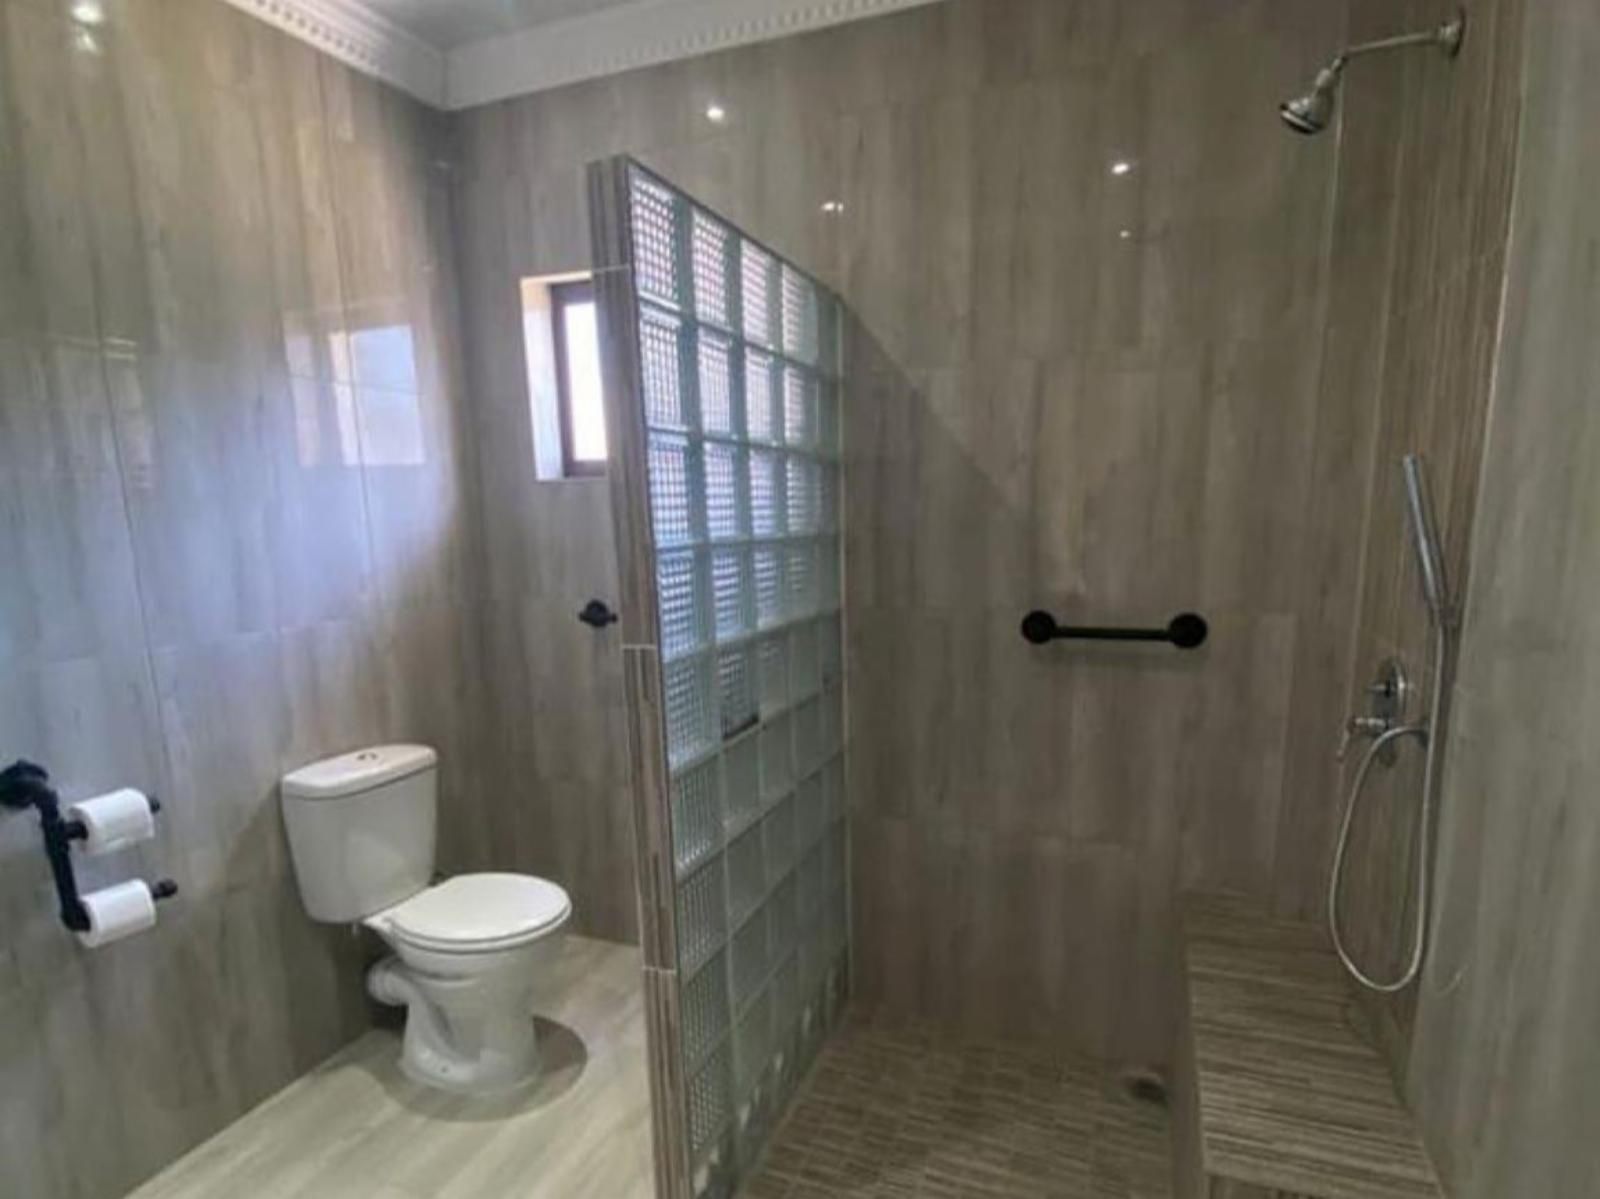 42 Upon Williams Wilkoppies Klerksdorp North West Province South Africa Unsaturated, Bathroom